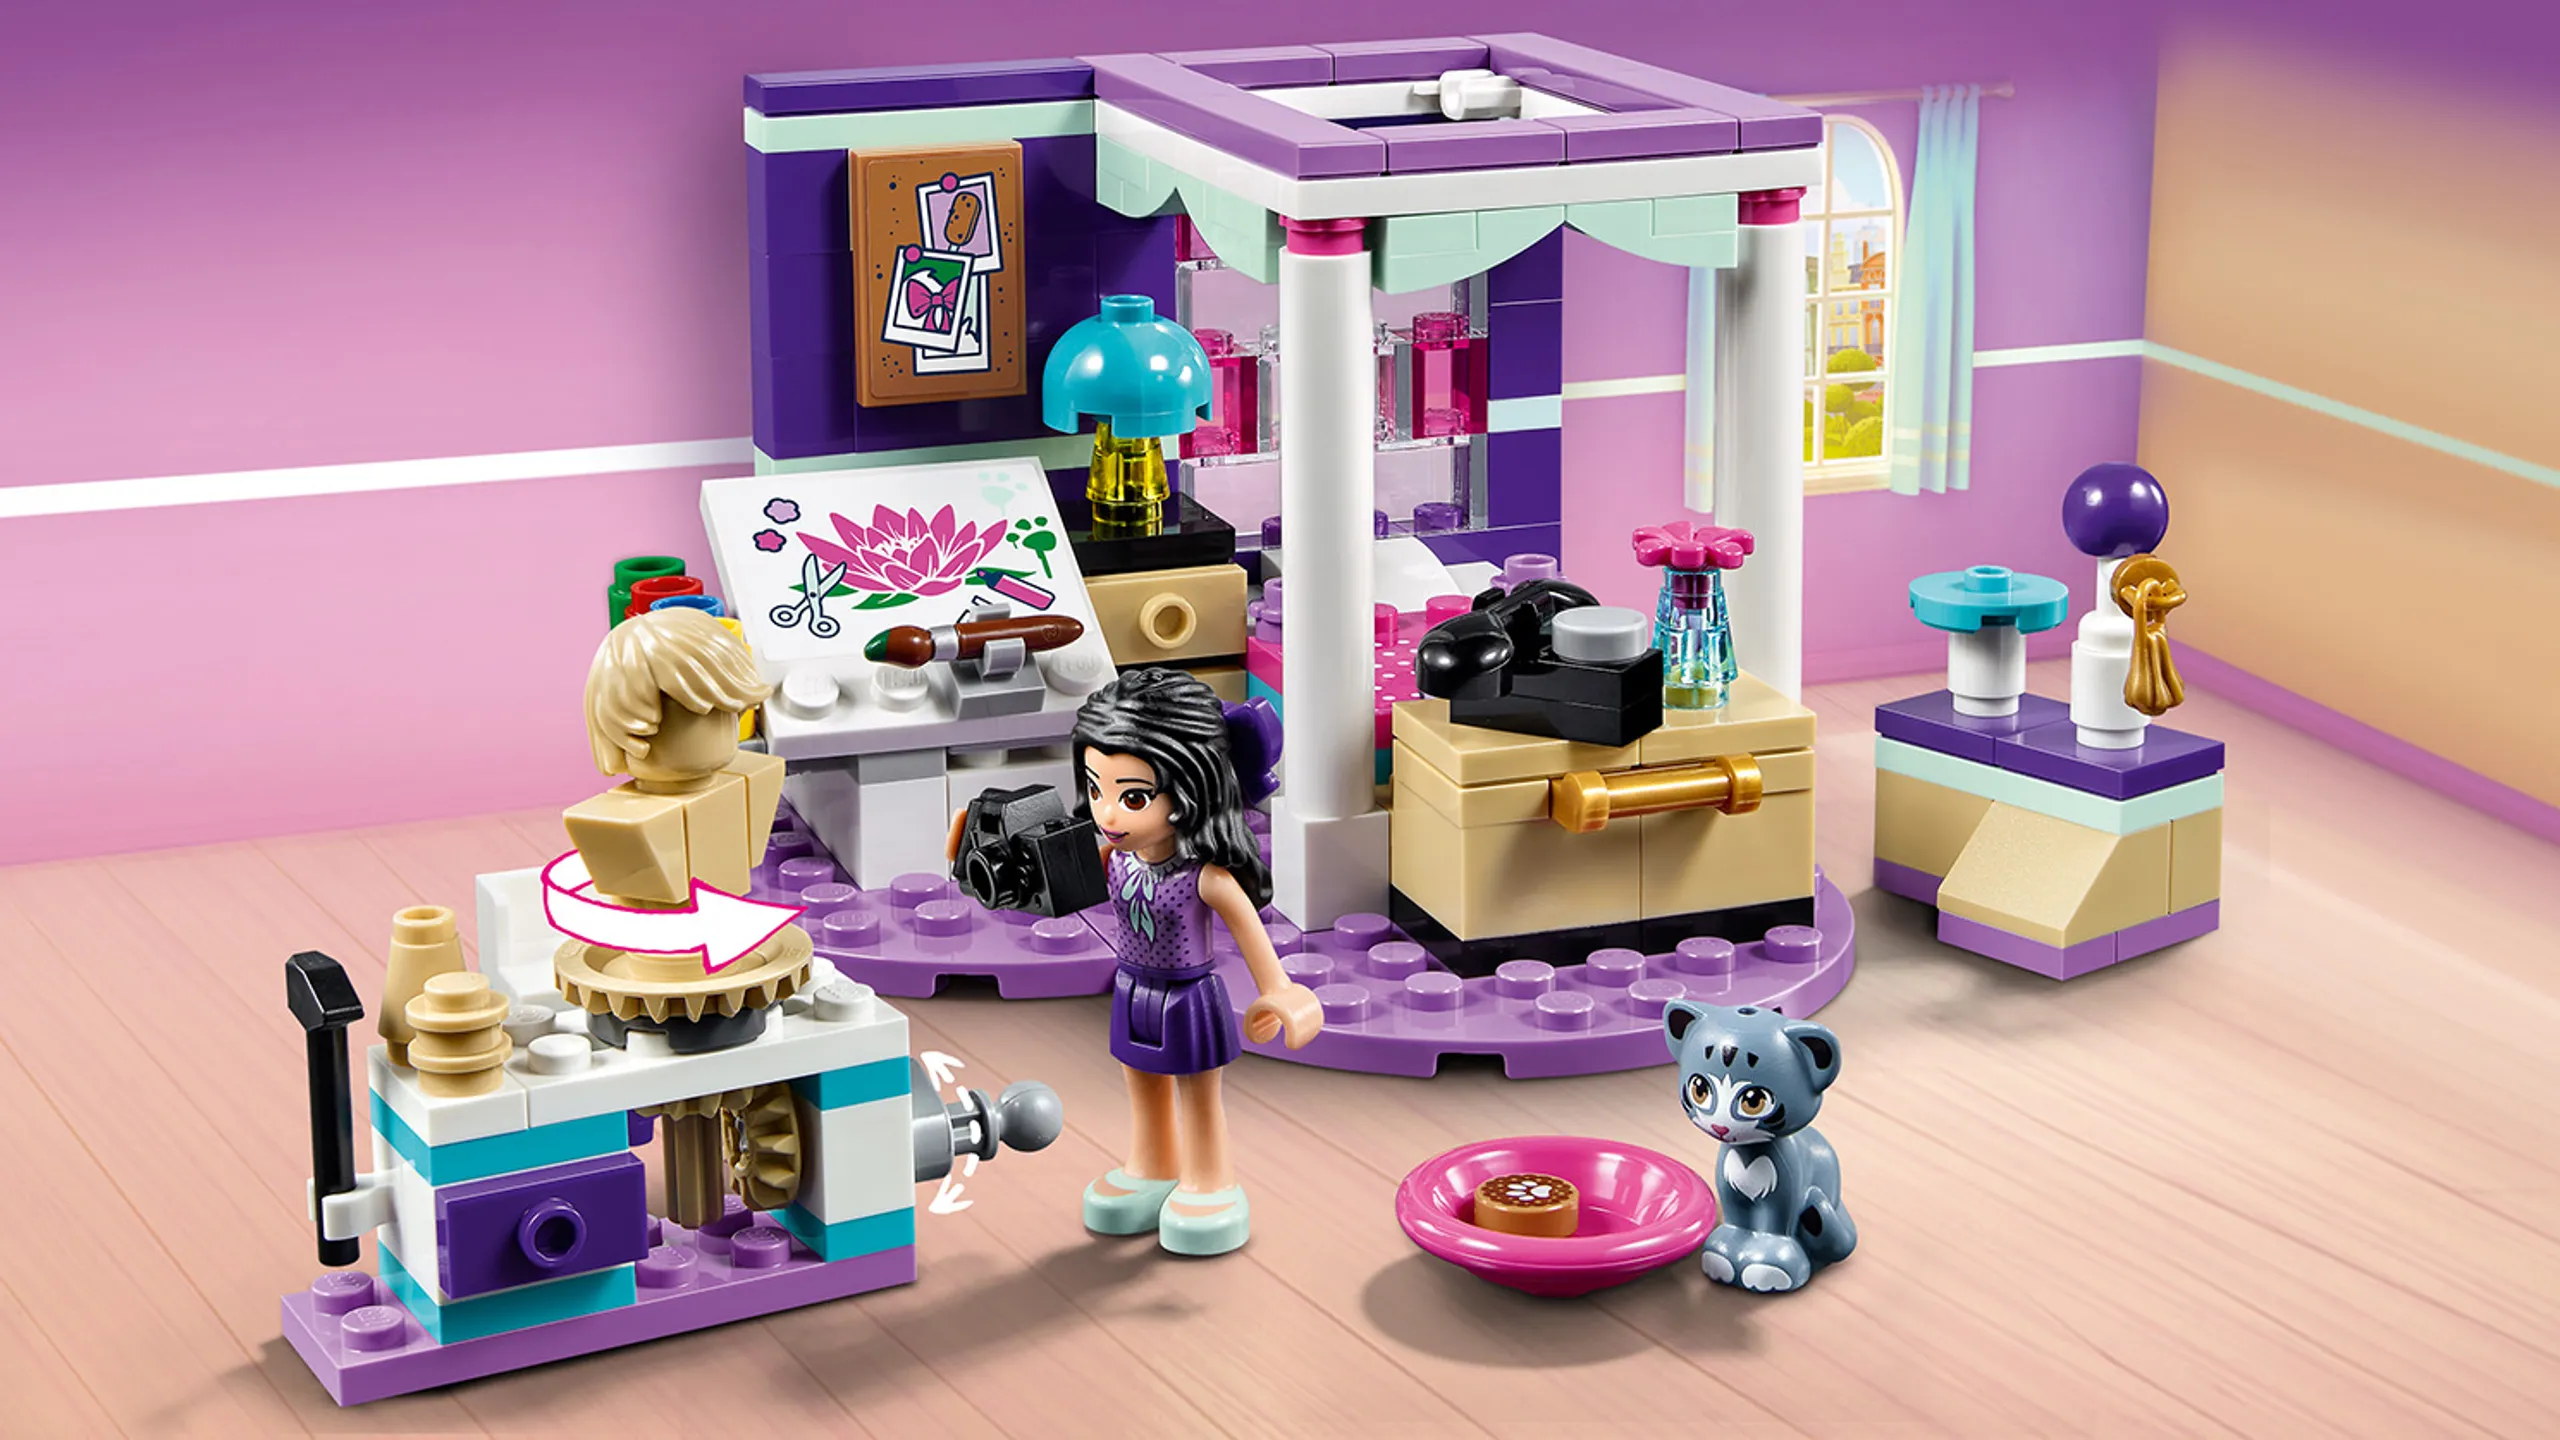 LEGO Friends - 41342 Emma's Bedroom - Be artistic with Emma in her purple bedroom! Take pictures with the camera, work with clay, paint a flower and feed the cat.